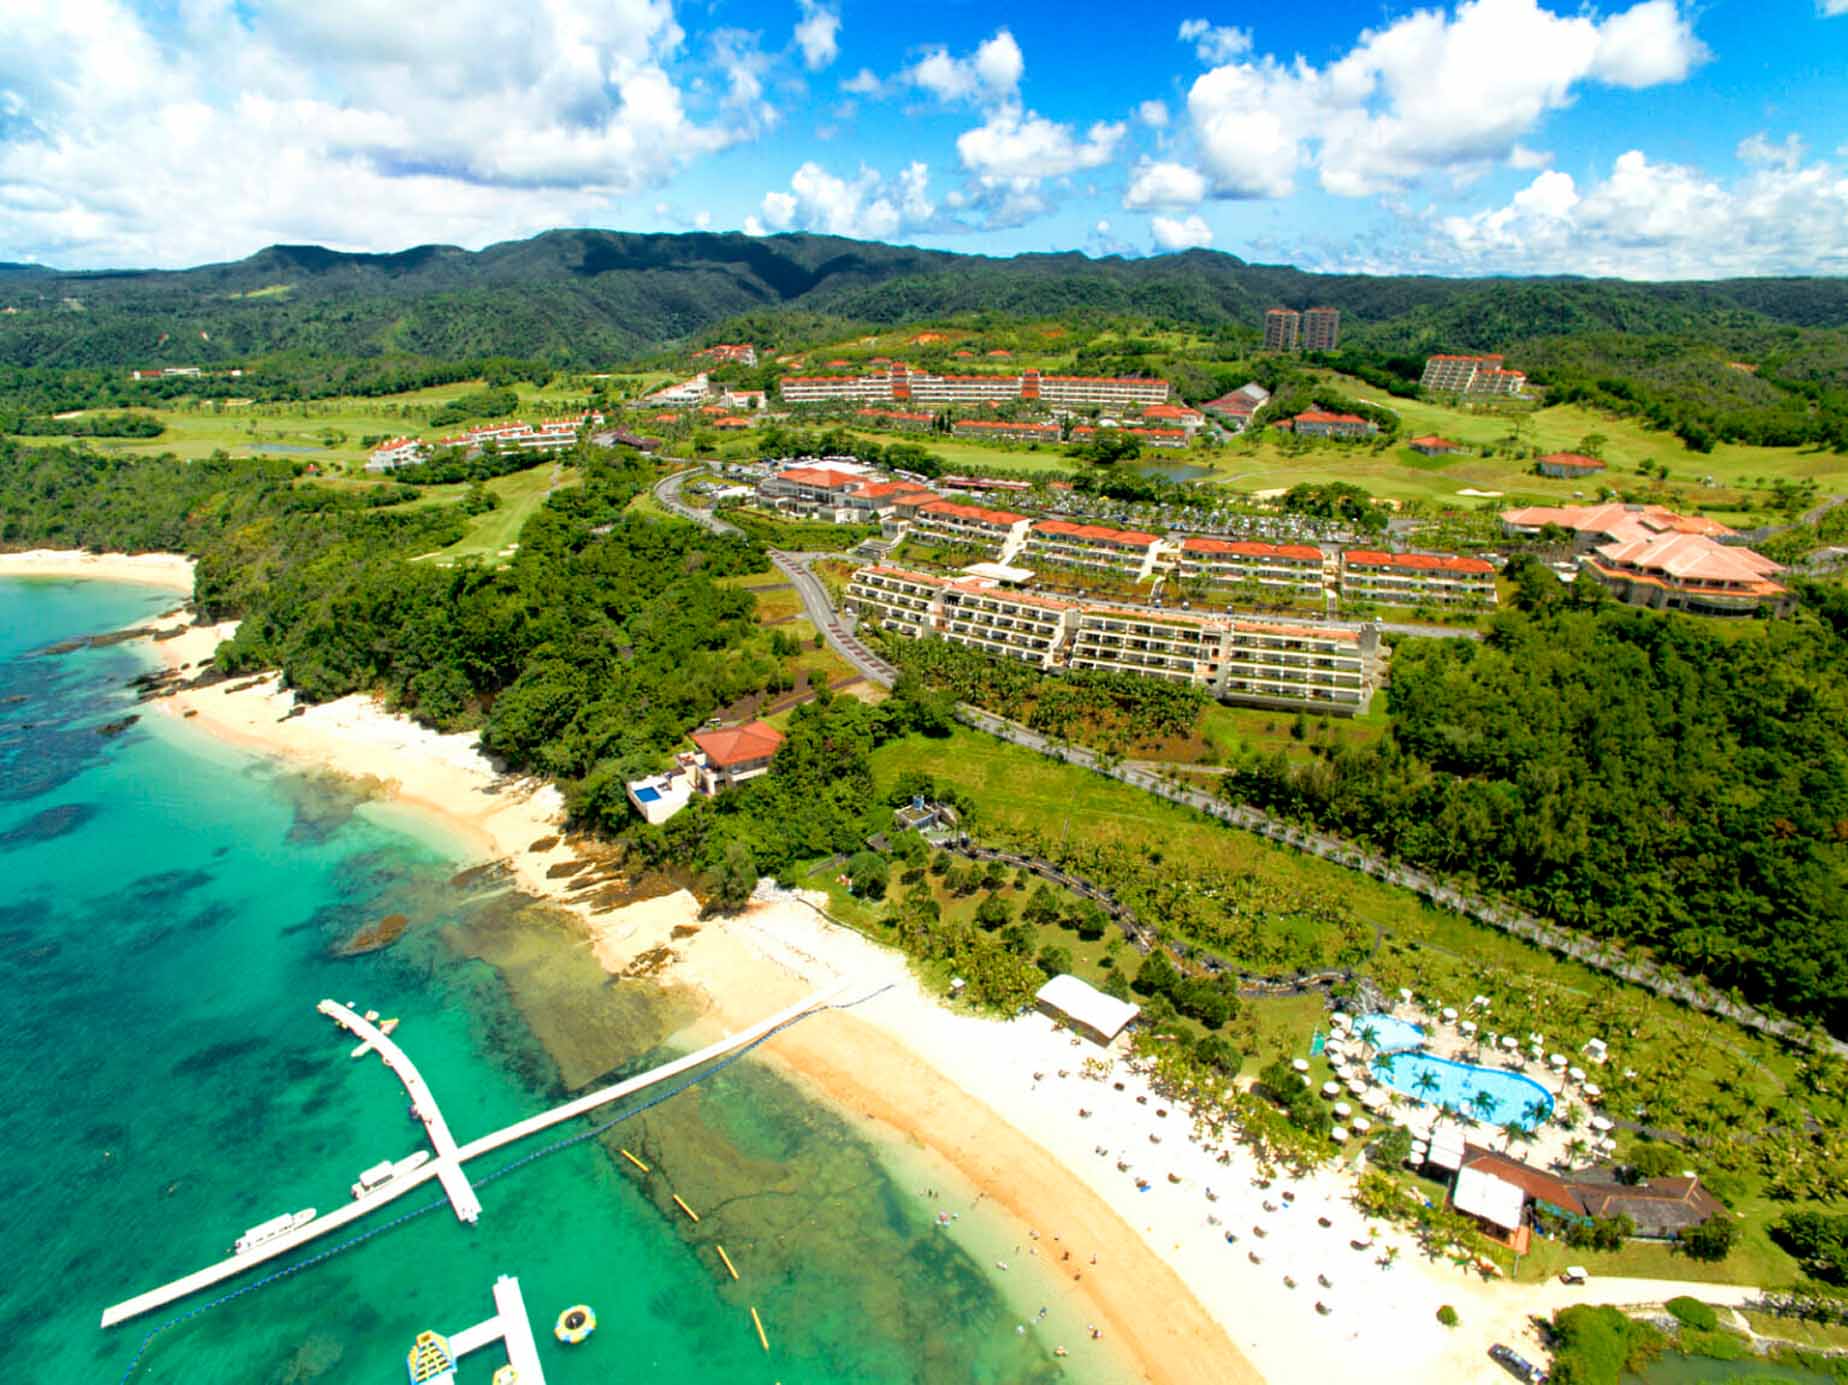 aerial view of the resort and the shore